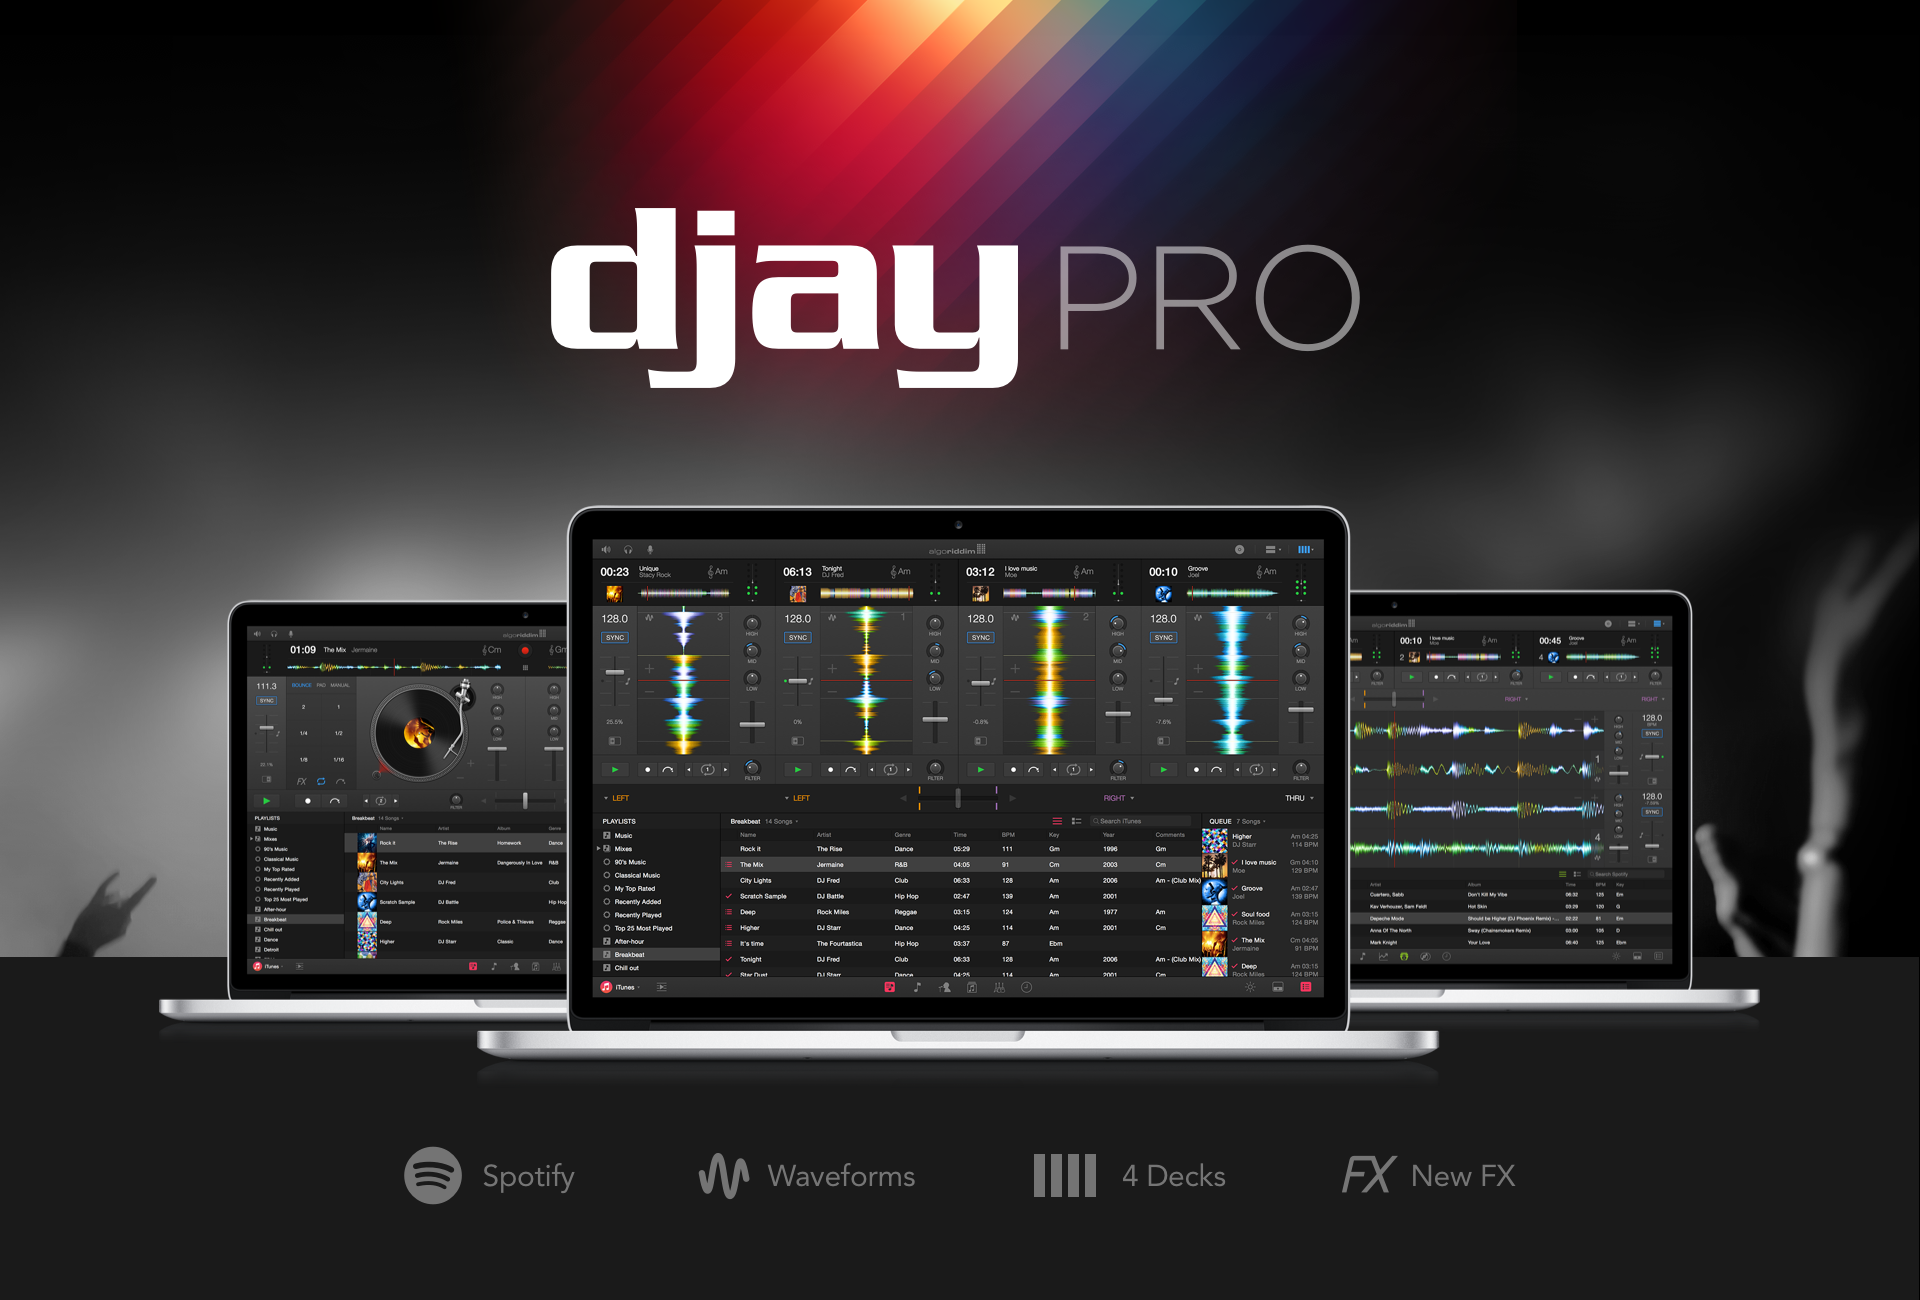 How to reload charts on djay pro windows 10